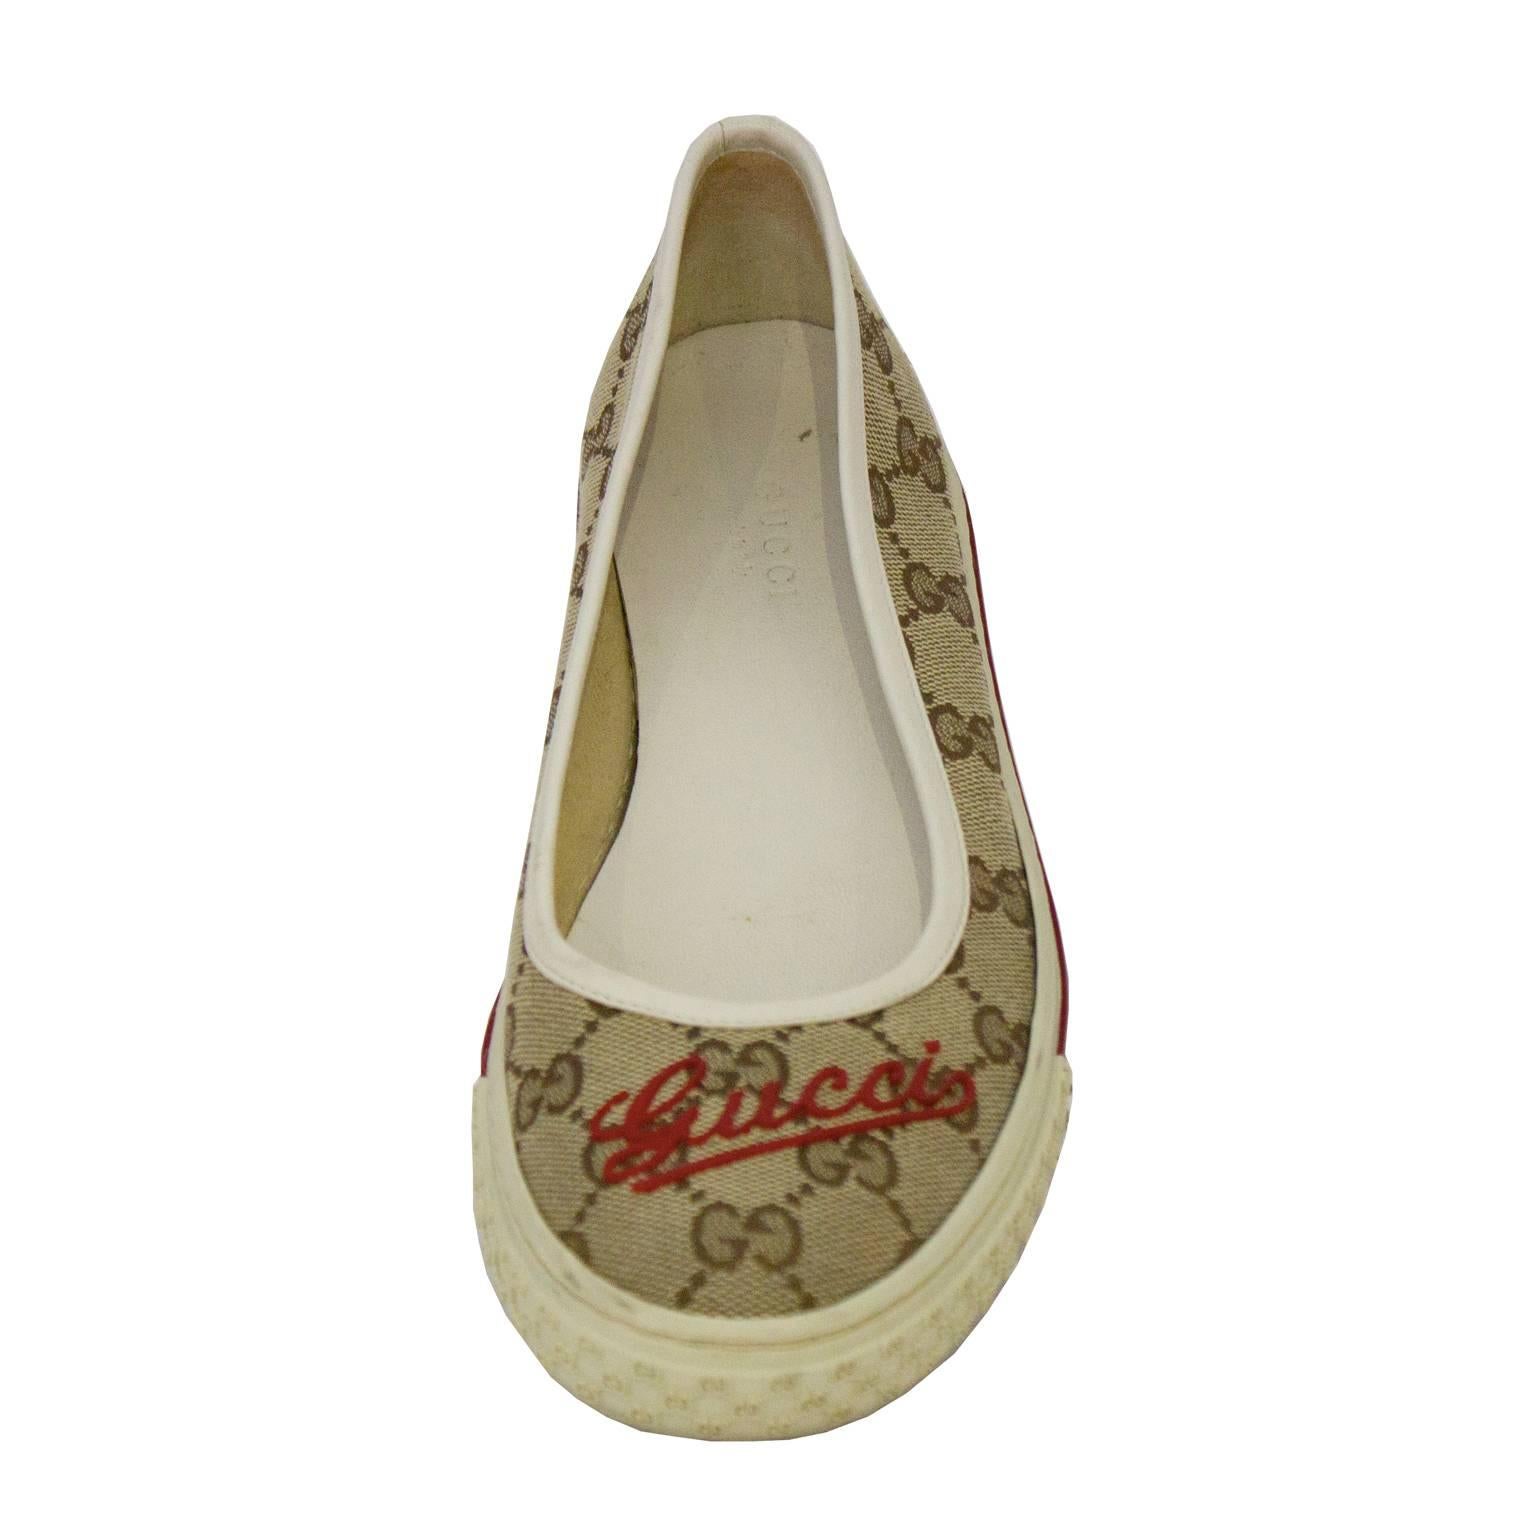 Fashionable Gucci Monogram Flats feature signature brown GG monogrammed canvas, and has red cursive Gucci logo on each toe. White rubber sneaker style sole, embossed with gucci monogram print around toe. Super chic and easy to wear. Excellent